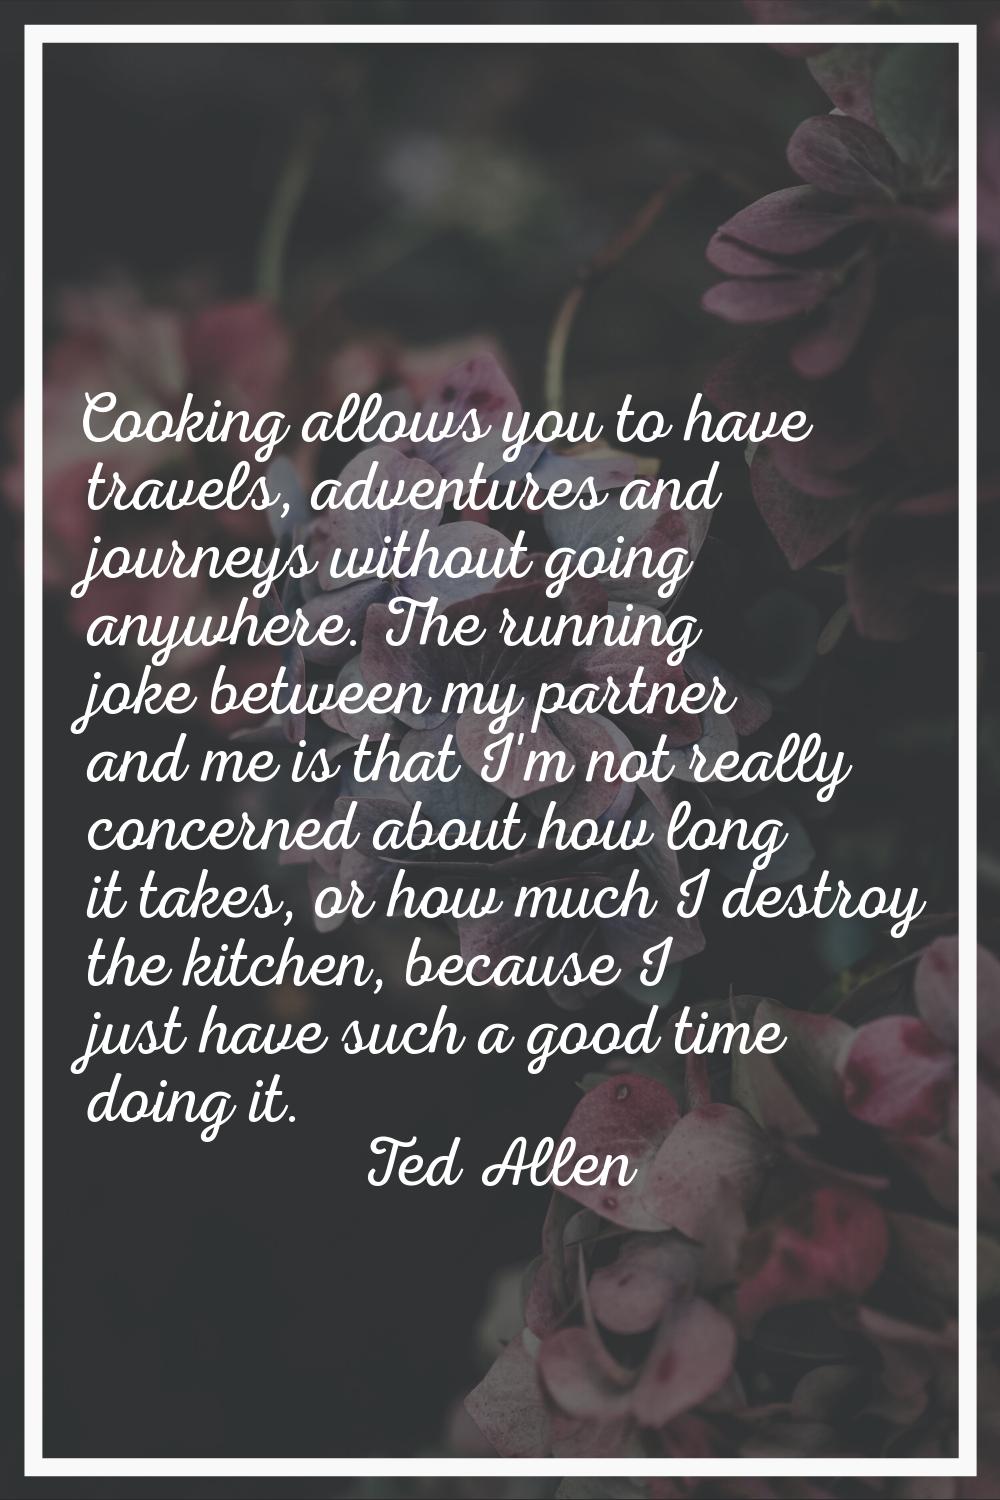 Cooking allows you to have travels, adventures and journeys without going anywhere. The running jok